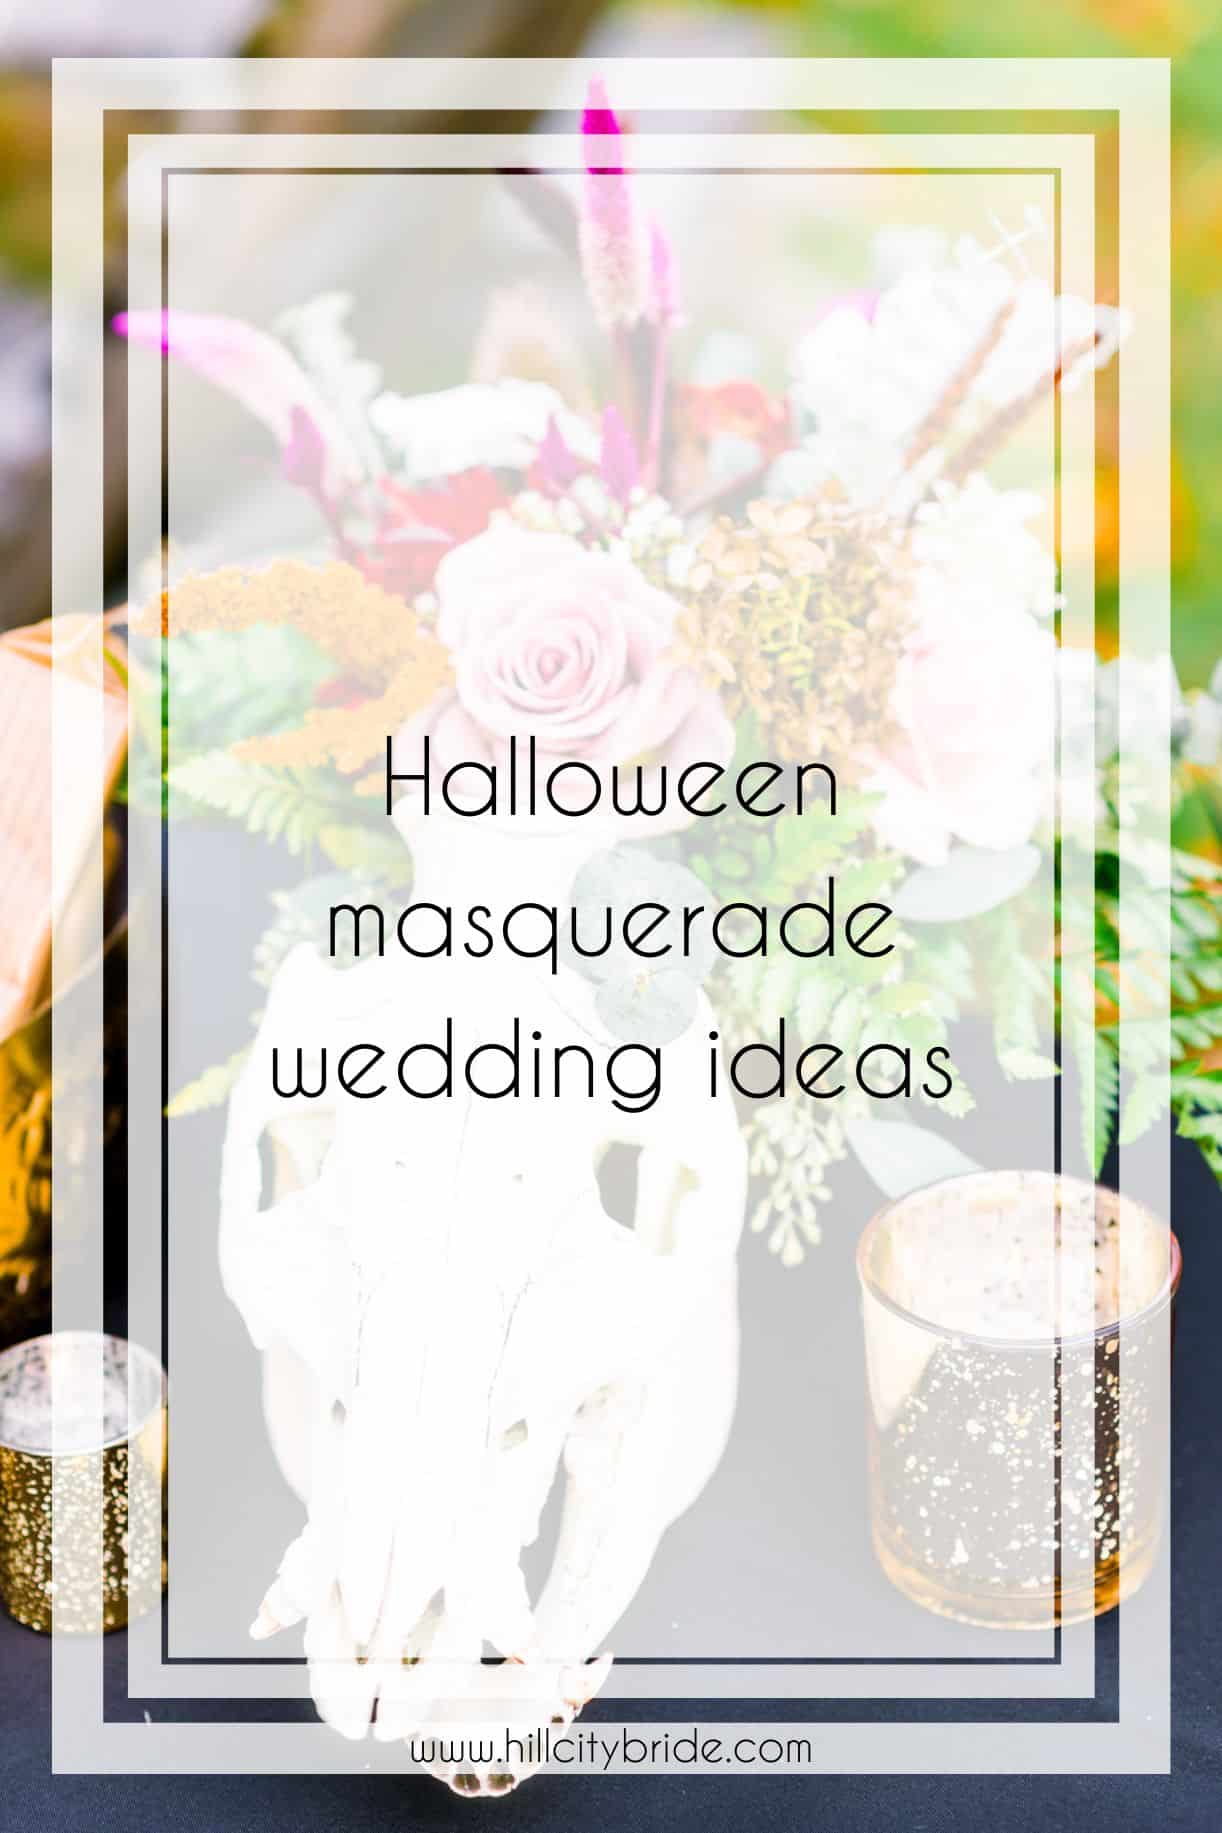 This Halloween Masquerade Wedding Gives All the Spooky Vibes